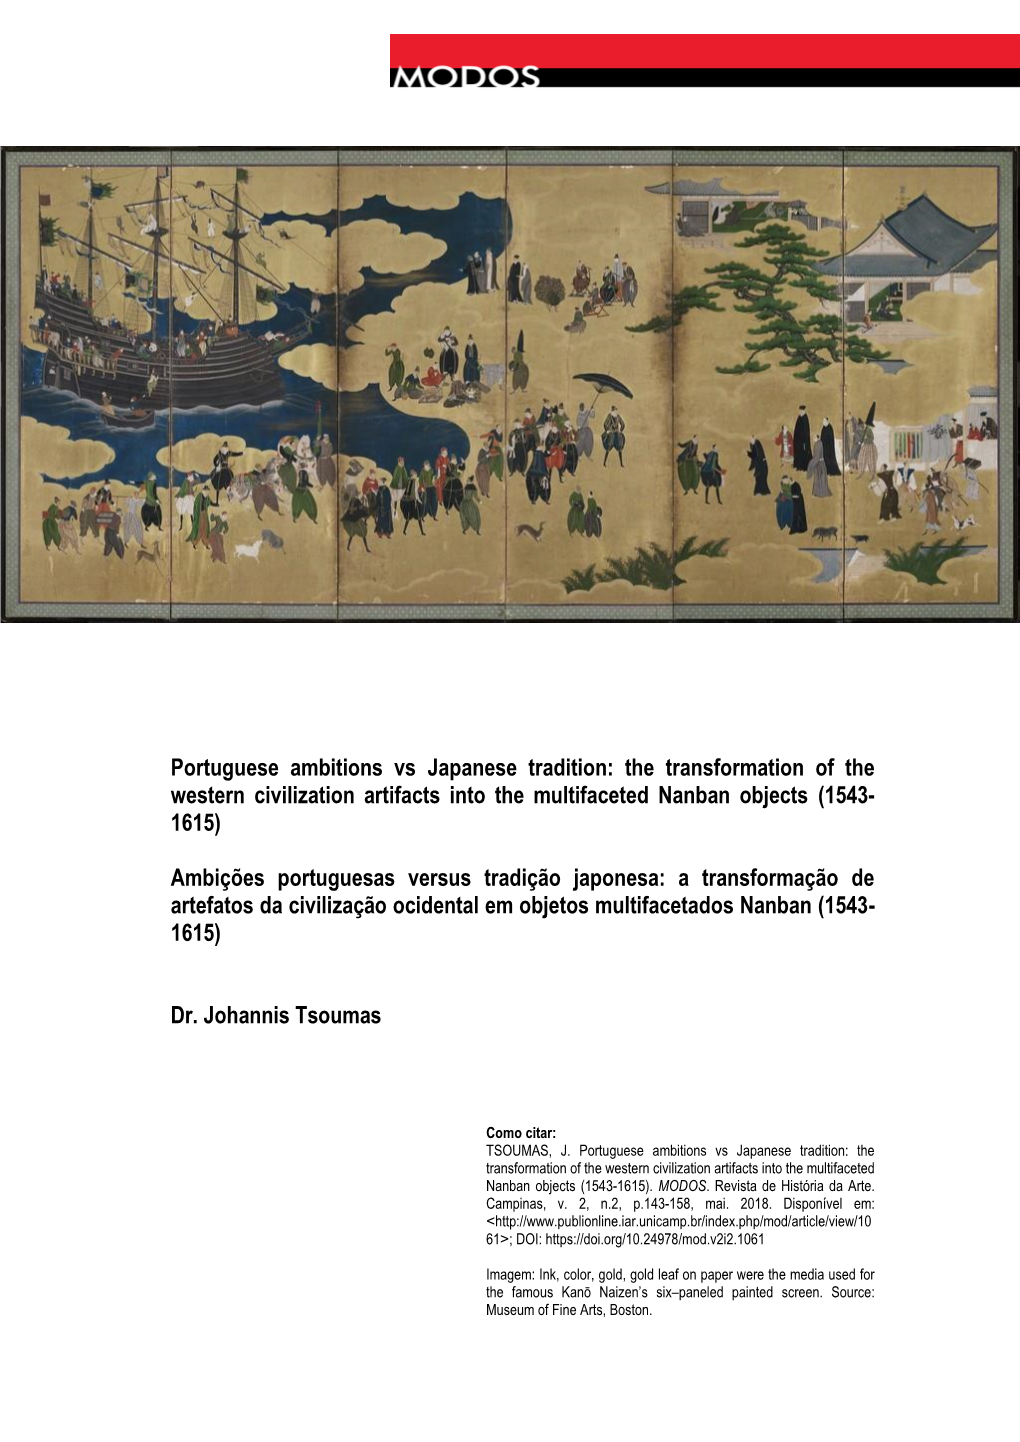 Portuguese Ambitions Vs Japanese Tradition: the Transformation of the Western Civilization Artifacts Into the Multifaceted Nanban Objects (1543- 1615)